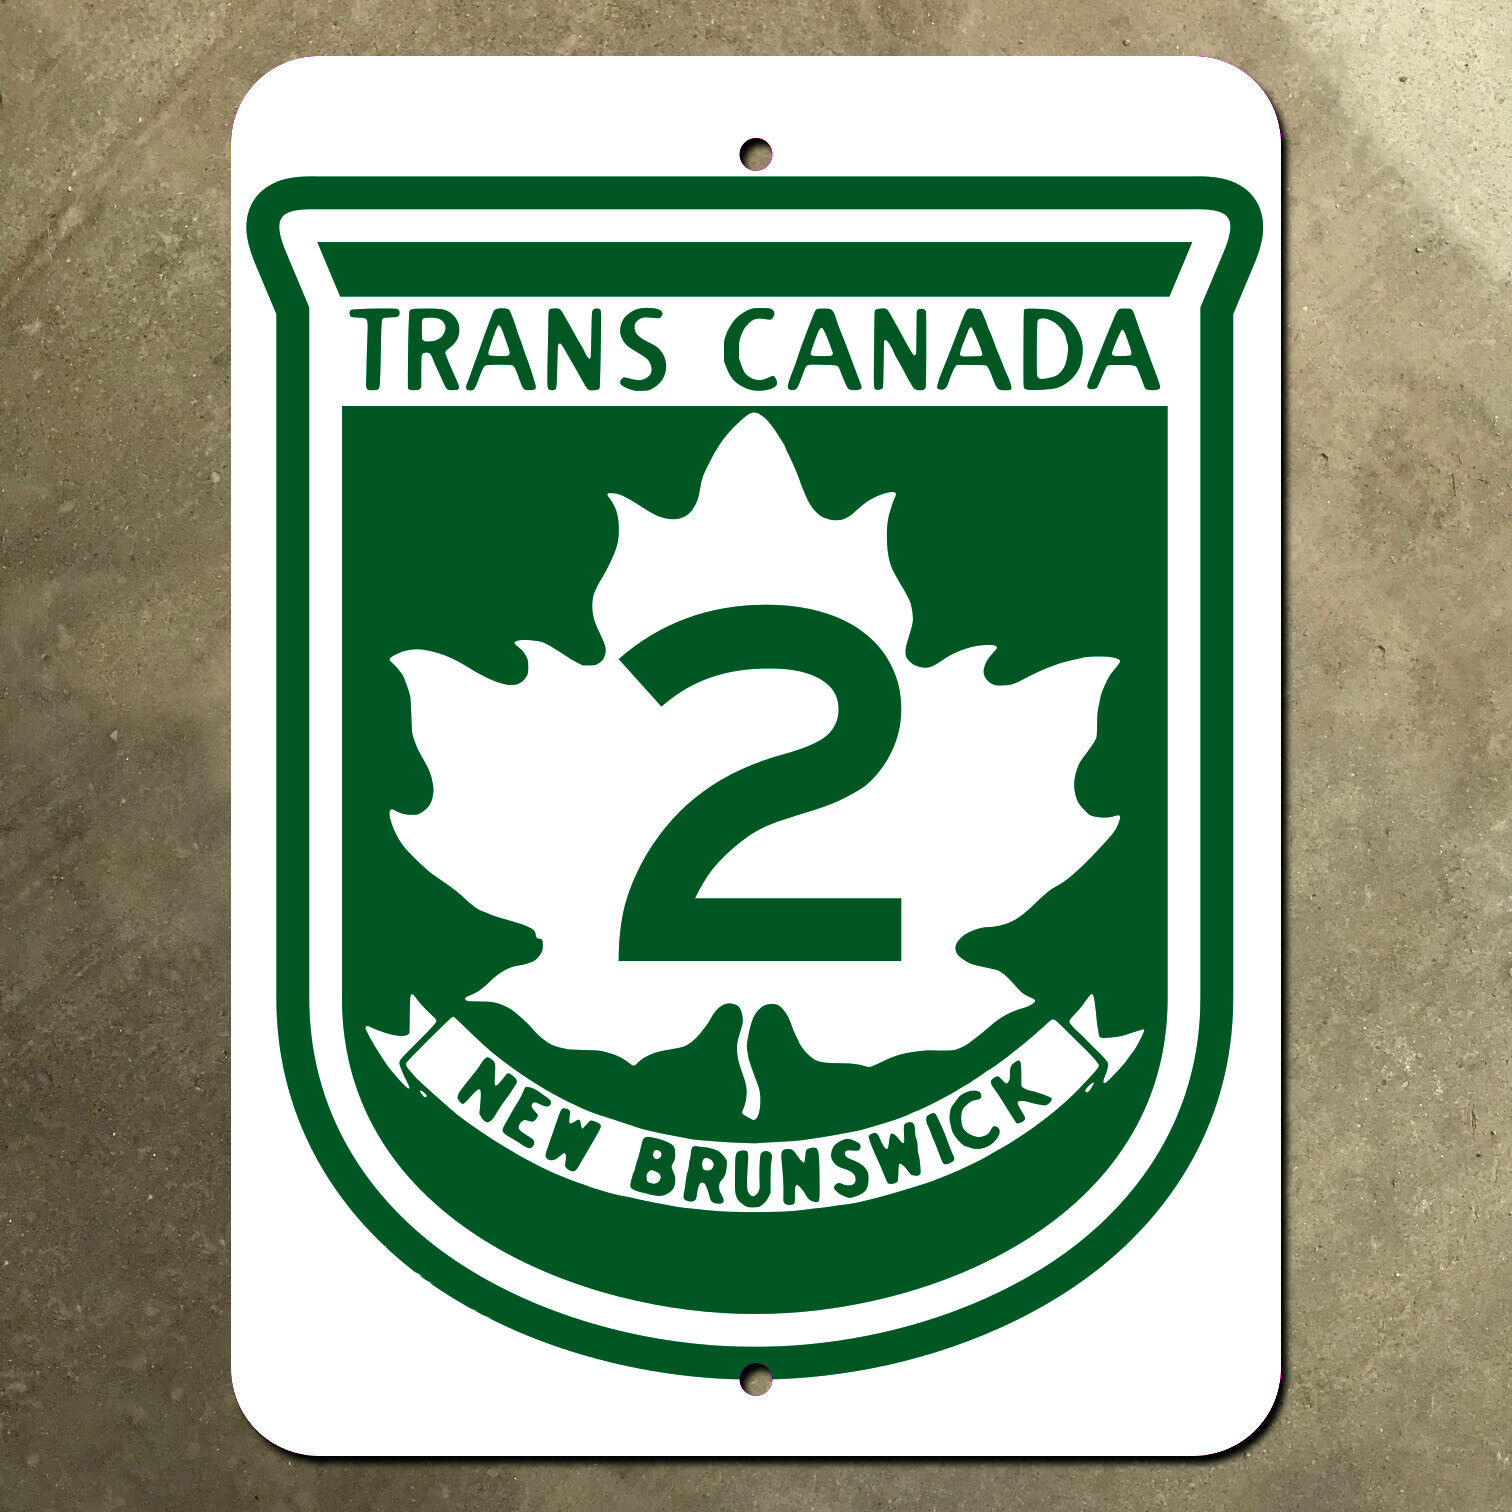 New Brunswick Trans-Canada highway 2 route marker road sign 1962 15x20